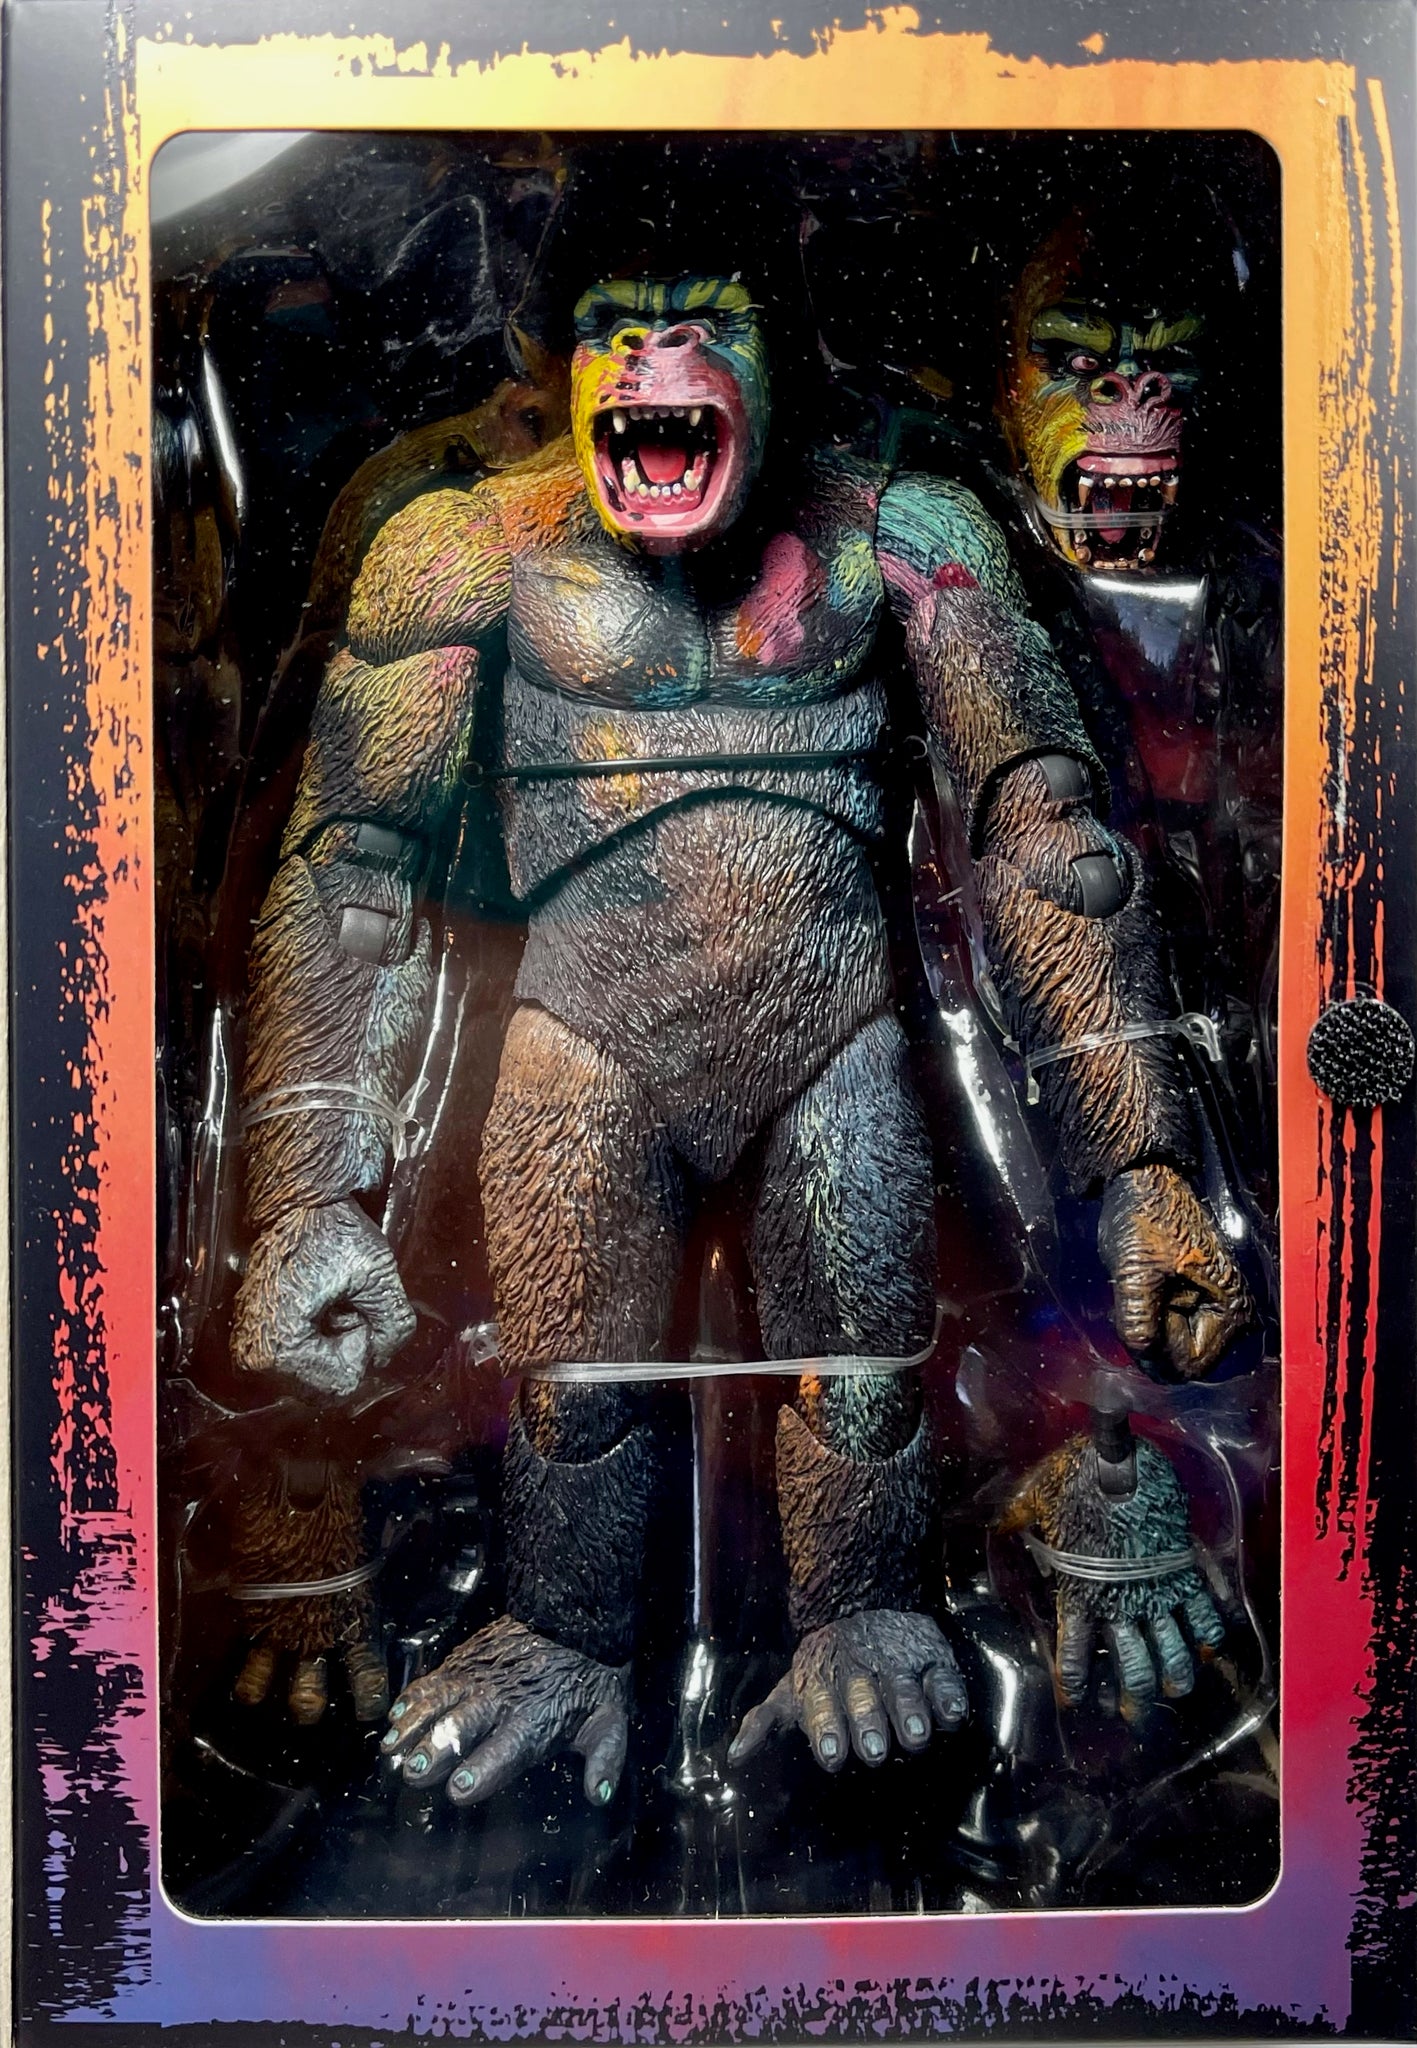 King Kong Classic By NECA, New in Box, 7.5" Tall, Fully Poseable, Accessories